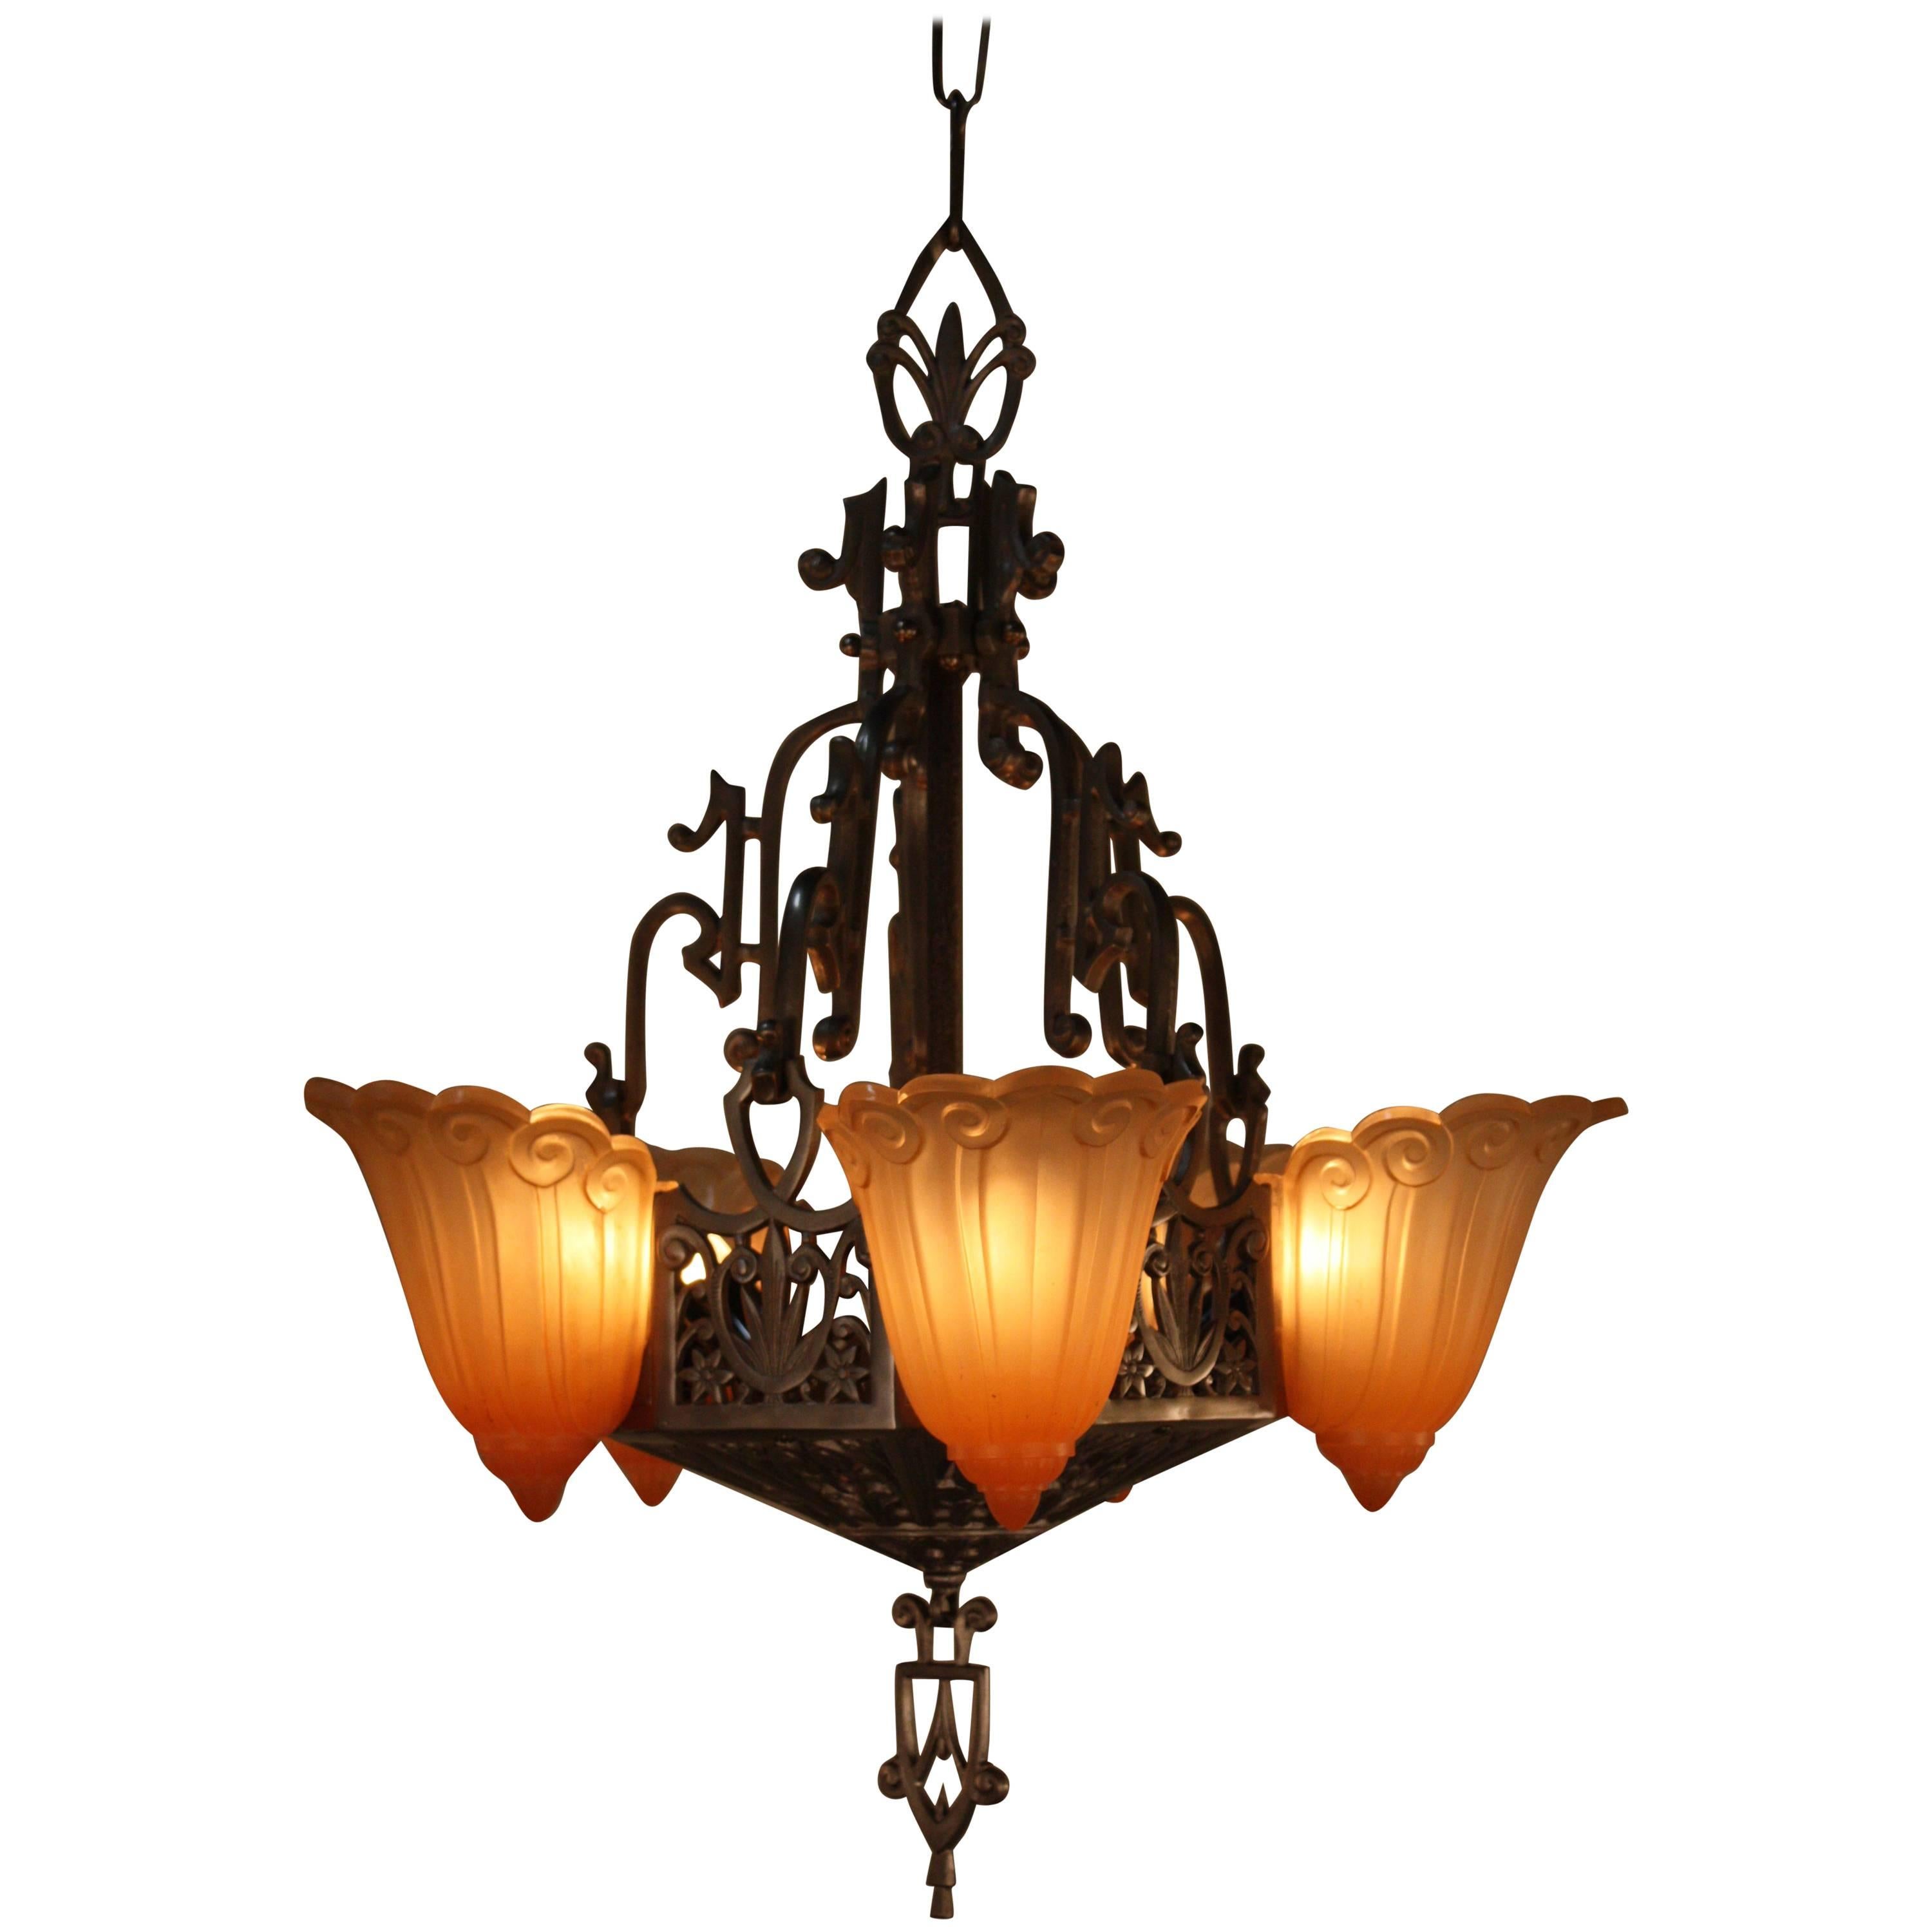 American Art Deco Five-Light Slip Shade Chandelier by Lincoln